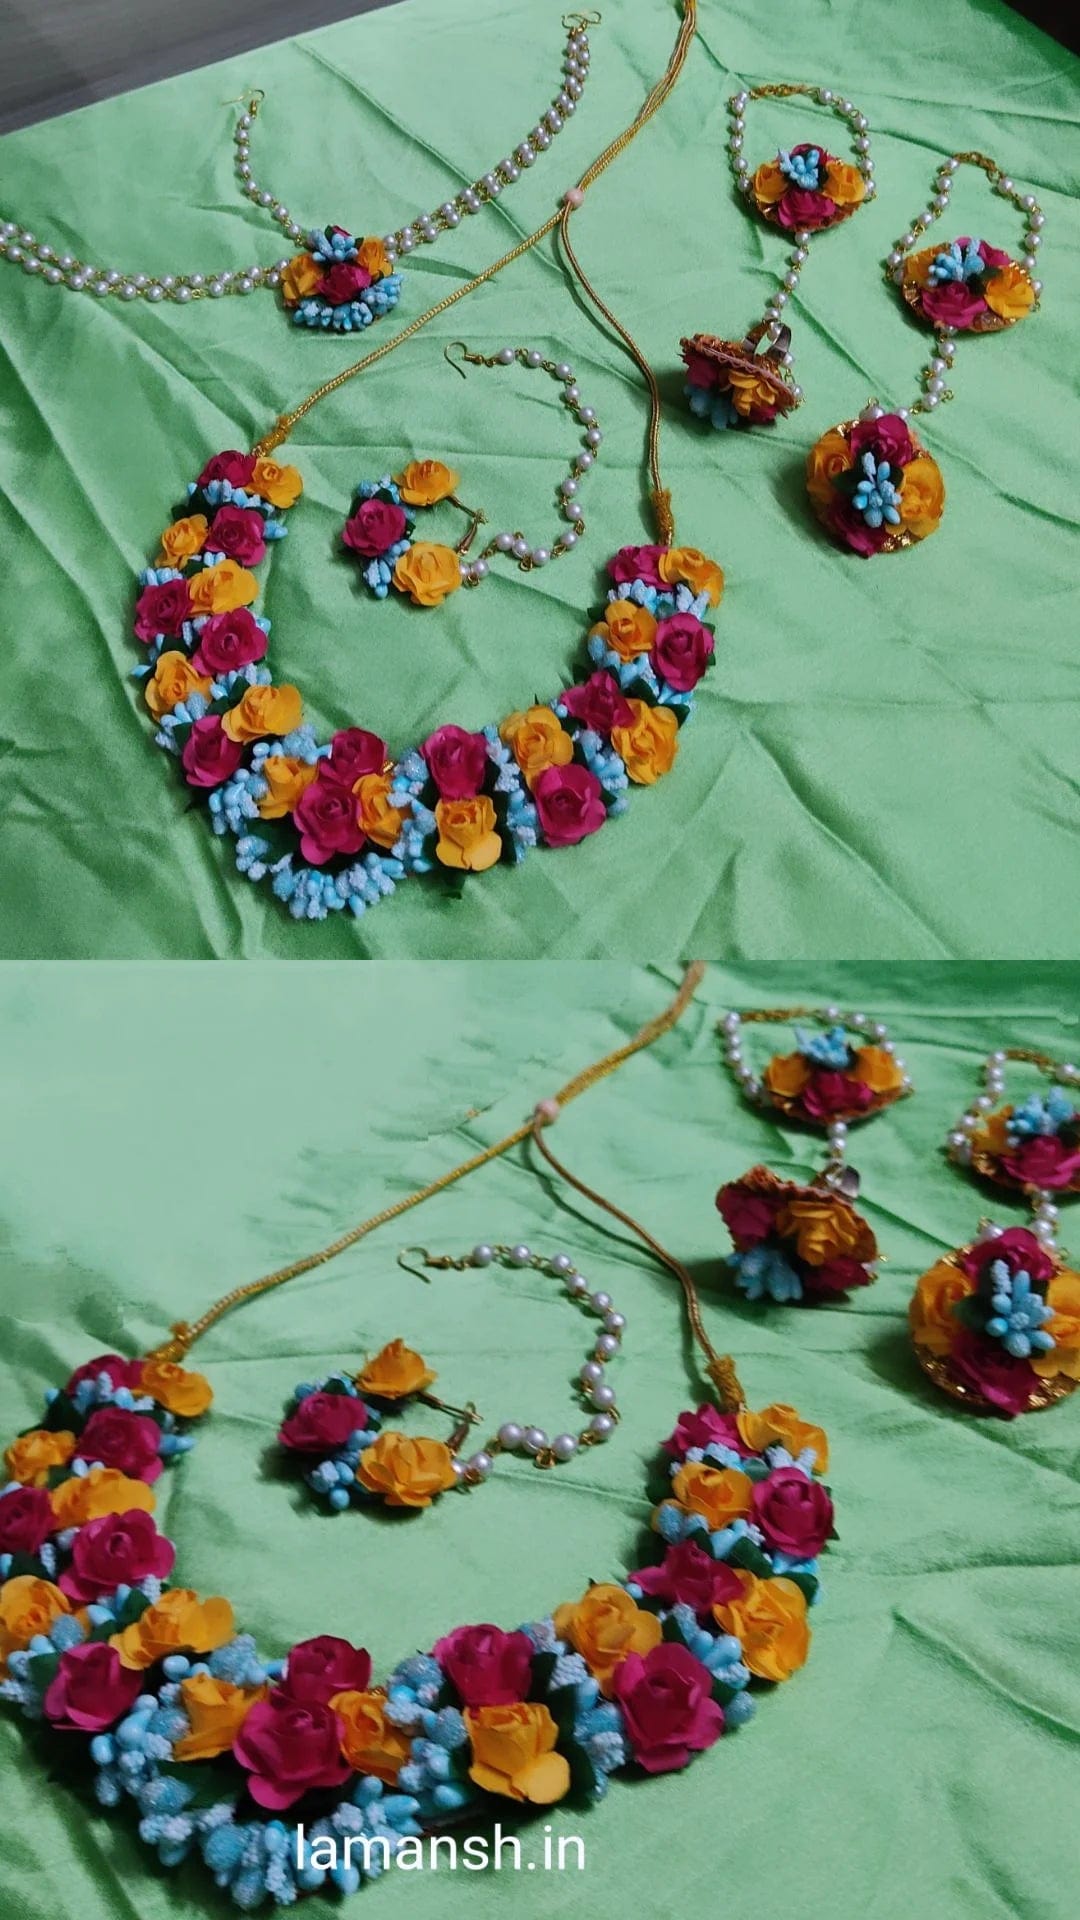 Lamansh Flower 🌺 Jewellery 1 Necklace, , 1 Nath Nosering, 2 Earrings, 1 Maangtika with side chain & 2 Bracelets Attached with ring / Yellow - Blue - Pink LAMANSH® Flower 🌺 Jewellery Set